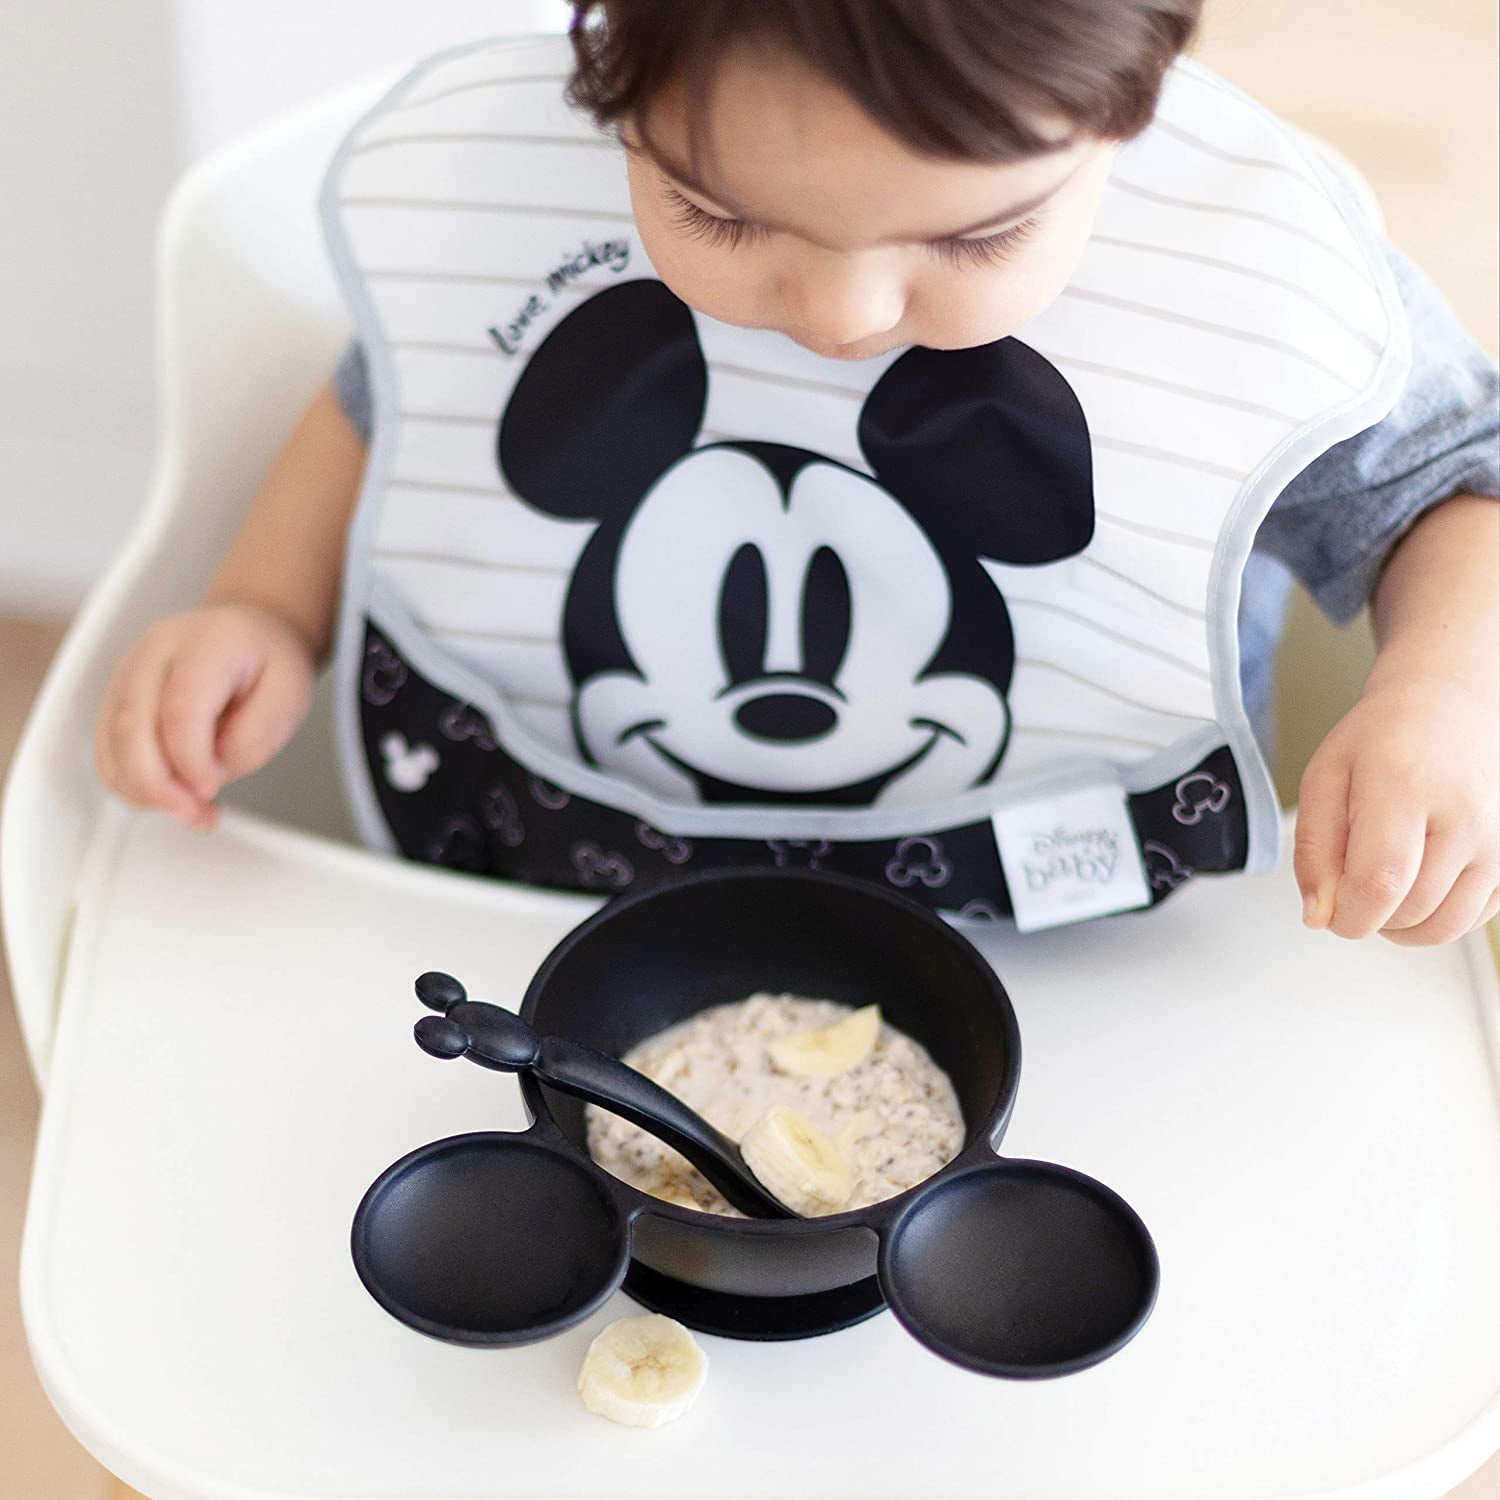 8 Disney-inspired kitchenware gifts perfect for the chef in your